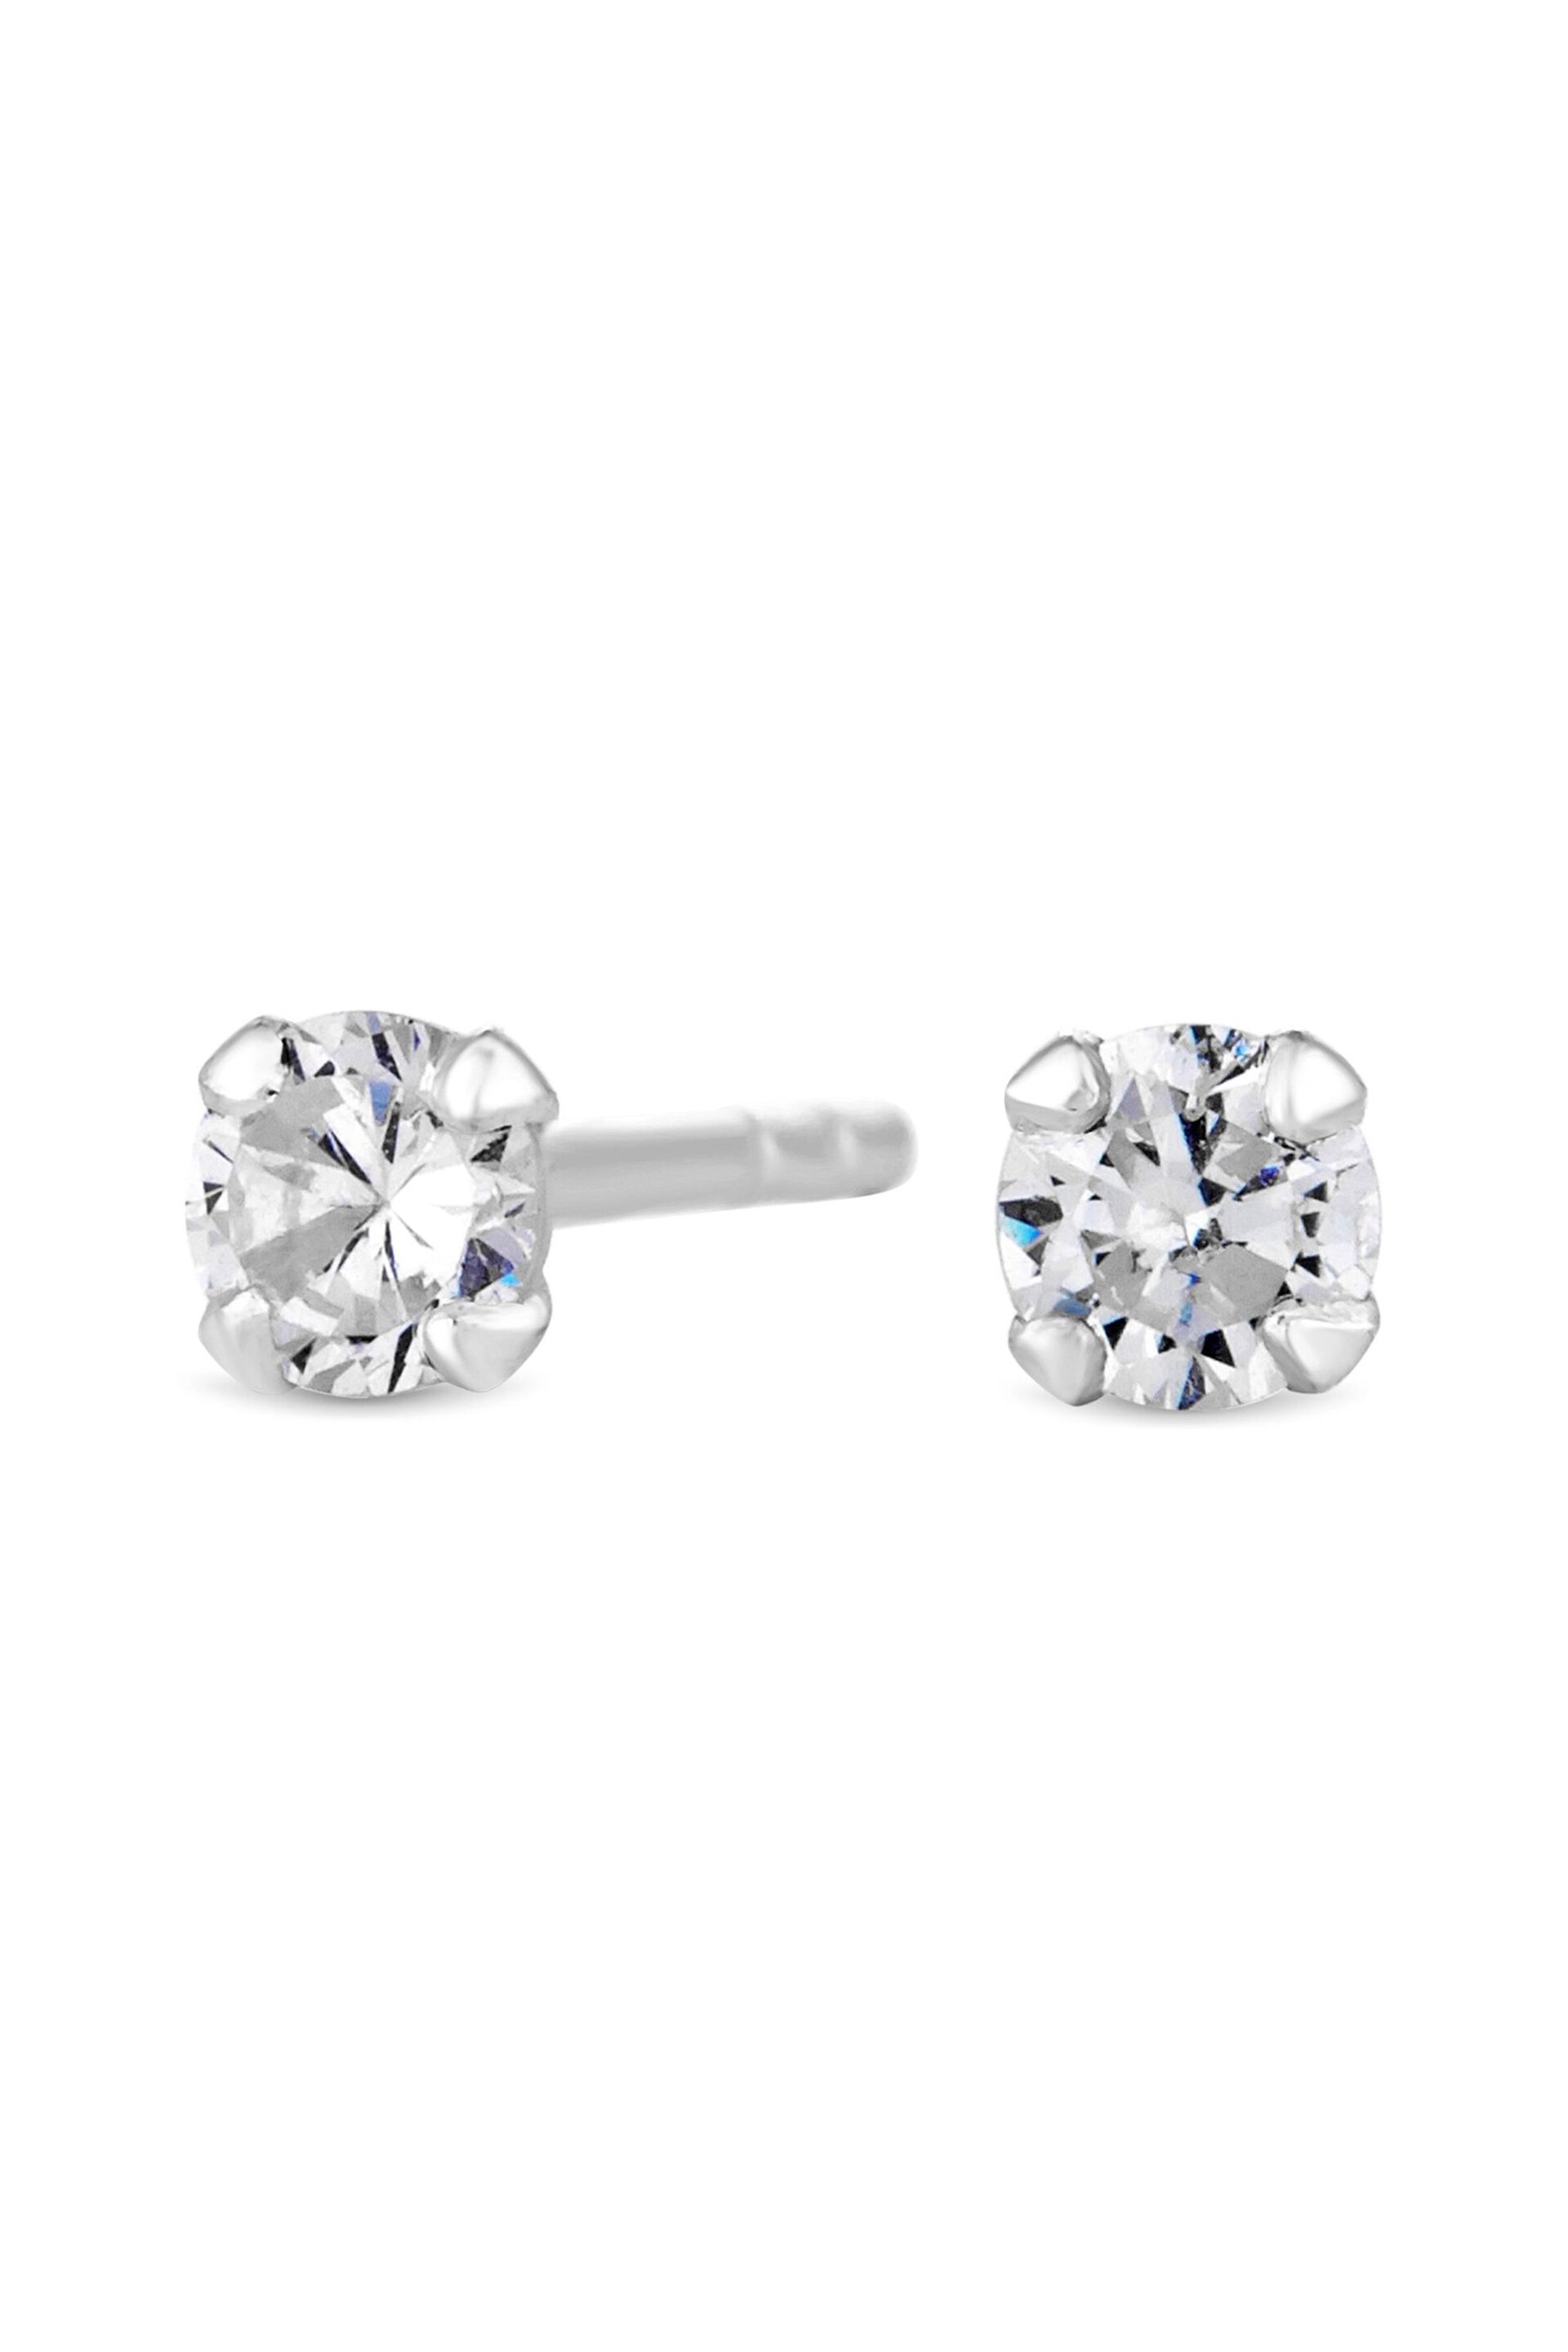 Simply Silver Sterling Silver Tone 925 Cubic Zirconia Small Stud Earrings - Image 1 of 1